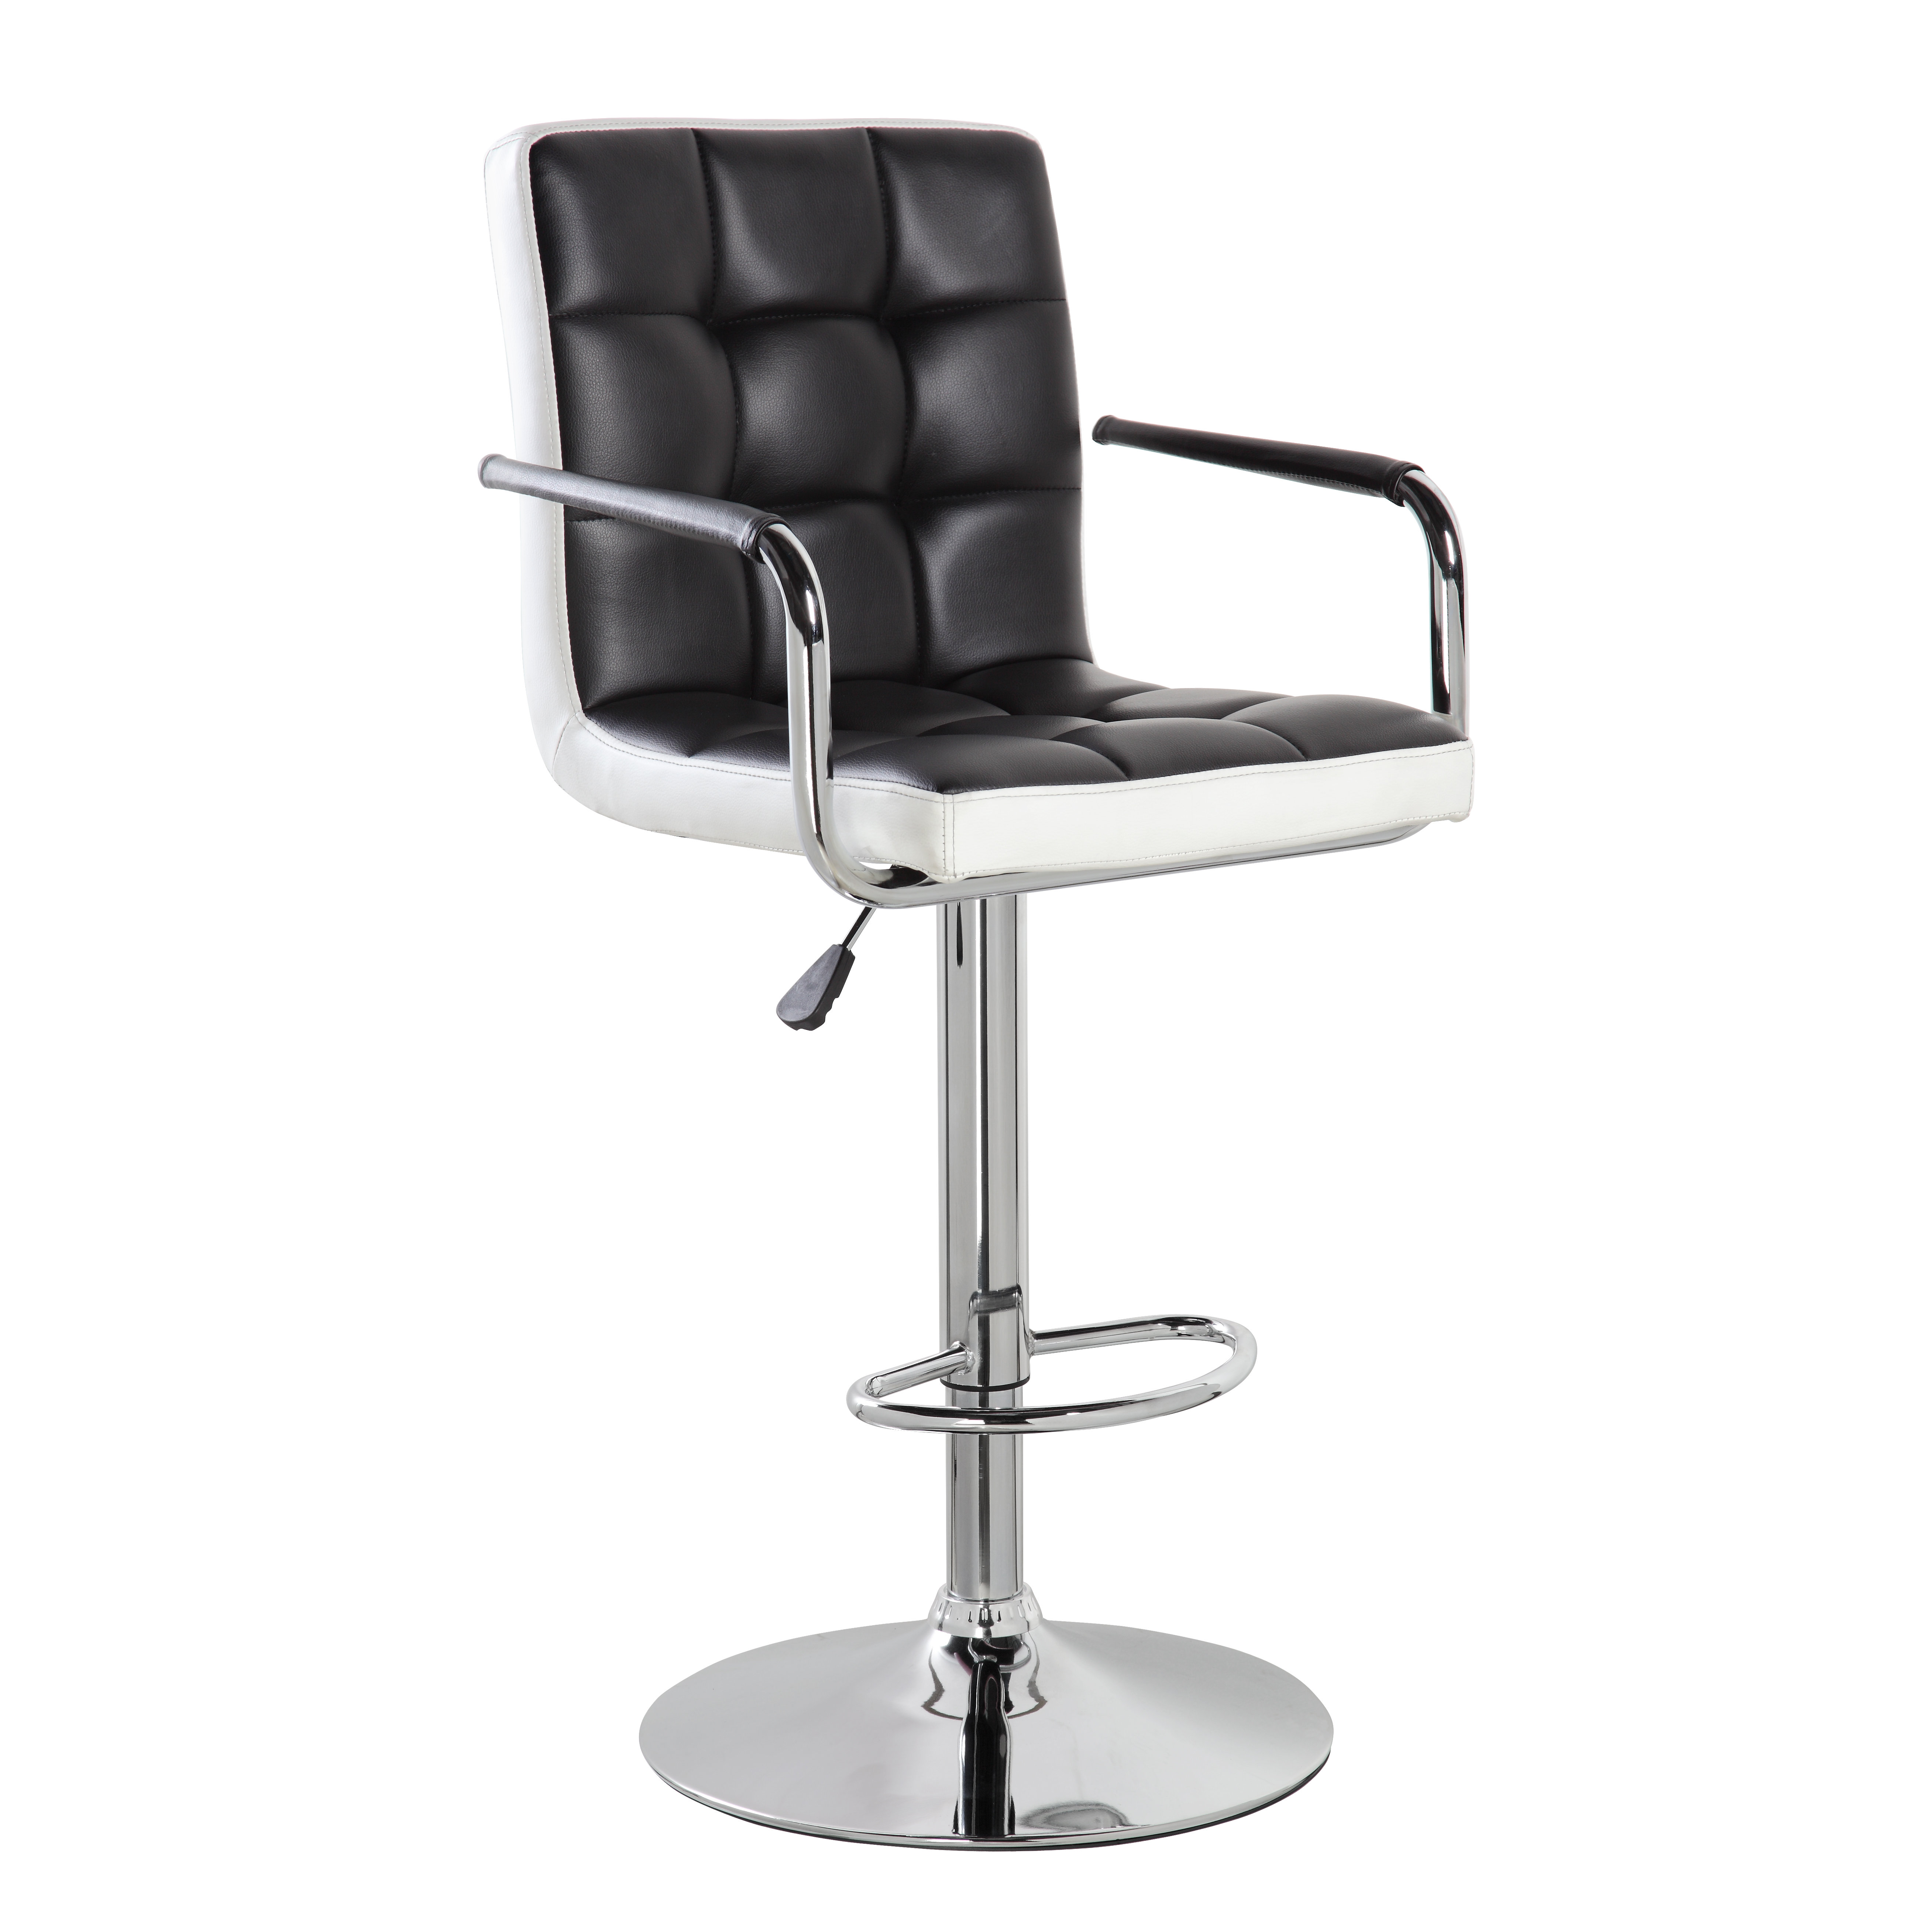 United Chair Industries LLC Adjustable Height Swivel Bar Stool with